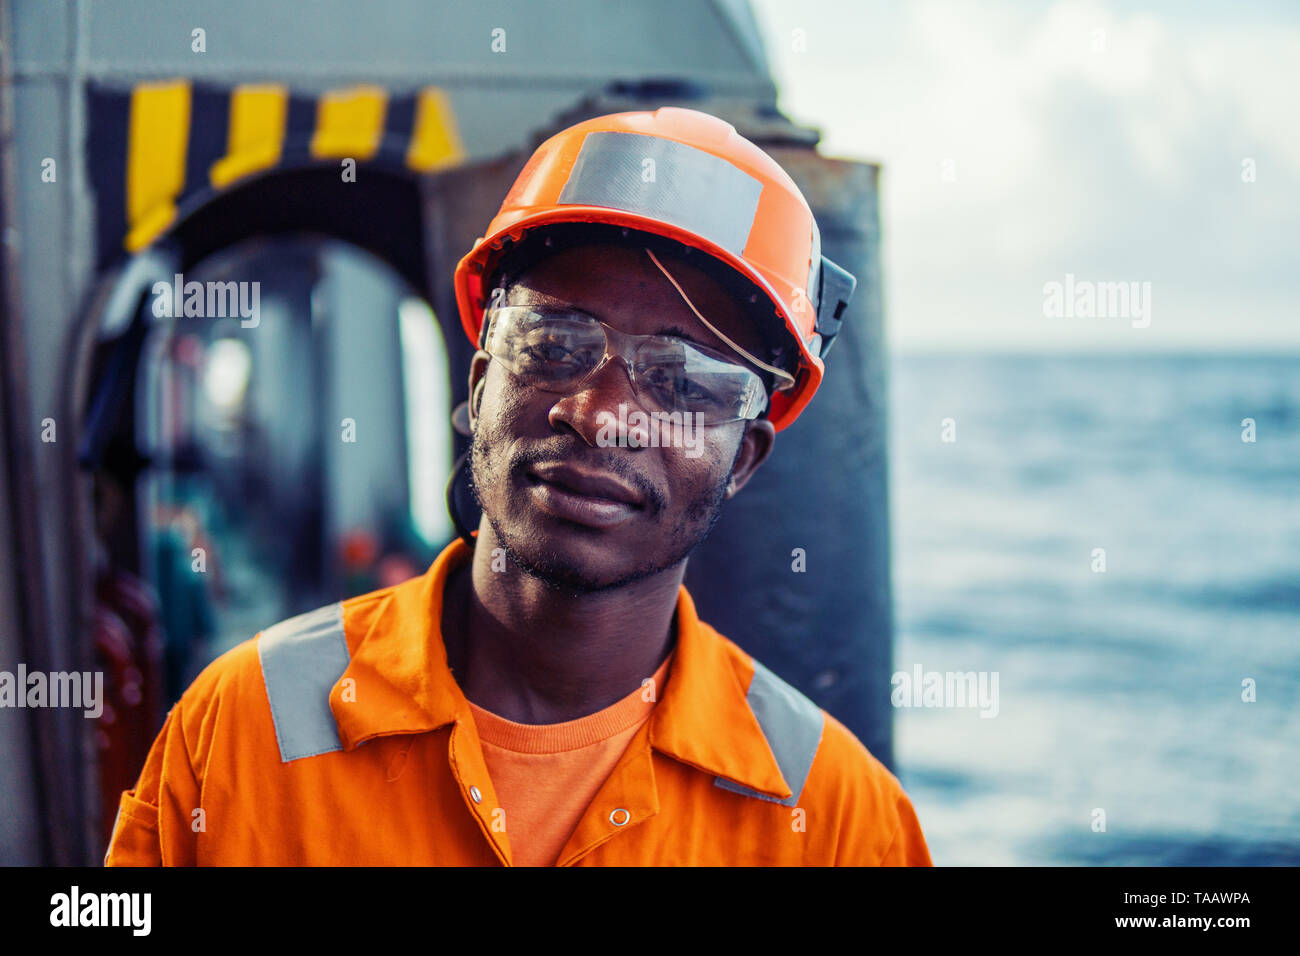 Tired Seaman AB or Bosun on deck of vessel or ship Stock Photo